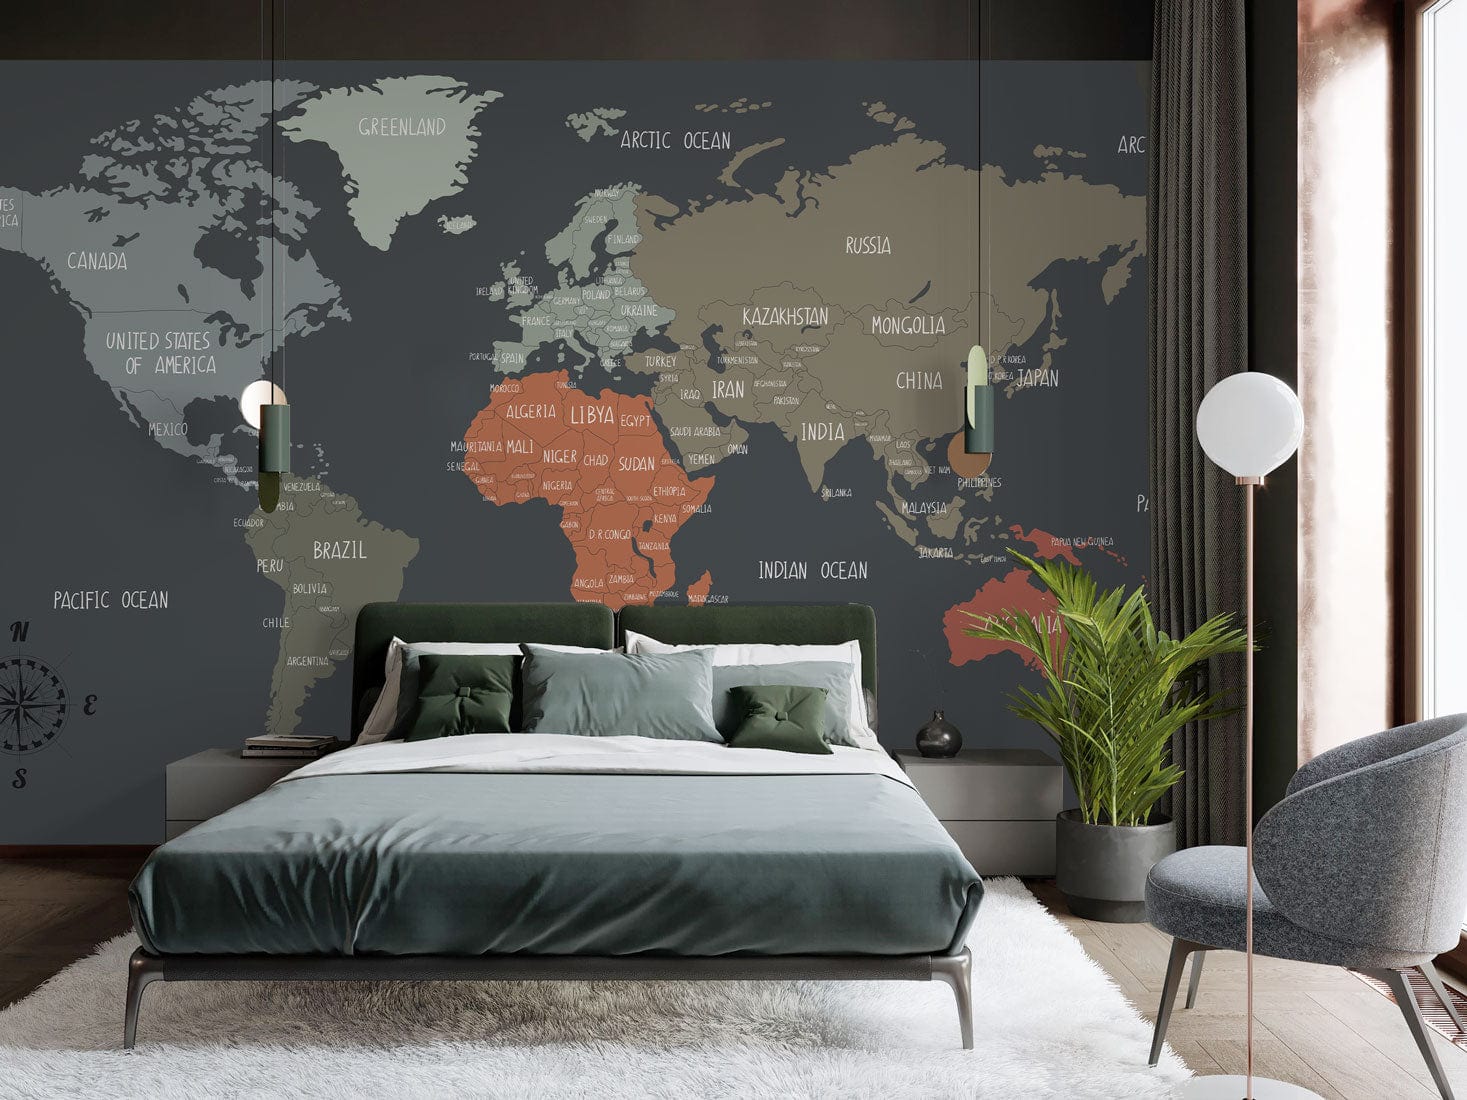 Wallpaper mural with a dark country map design that may be used for decorating bedrooms.